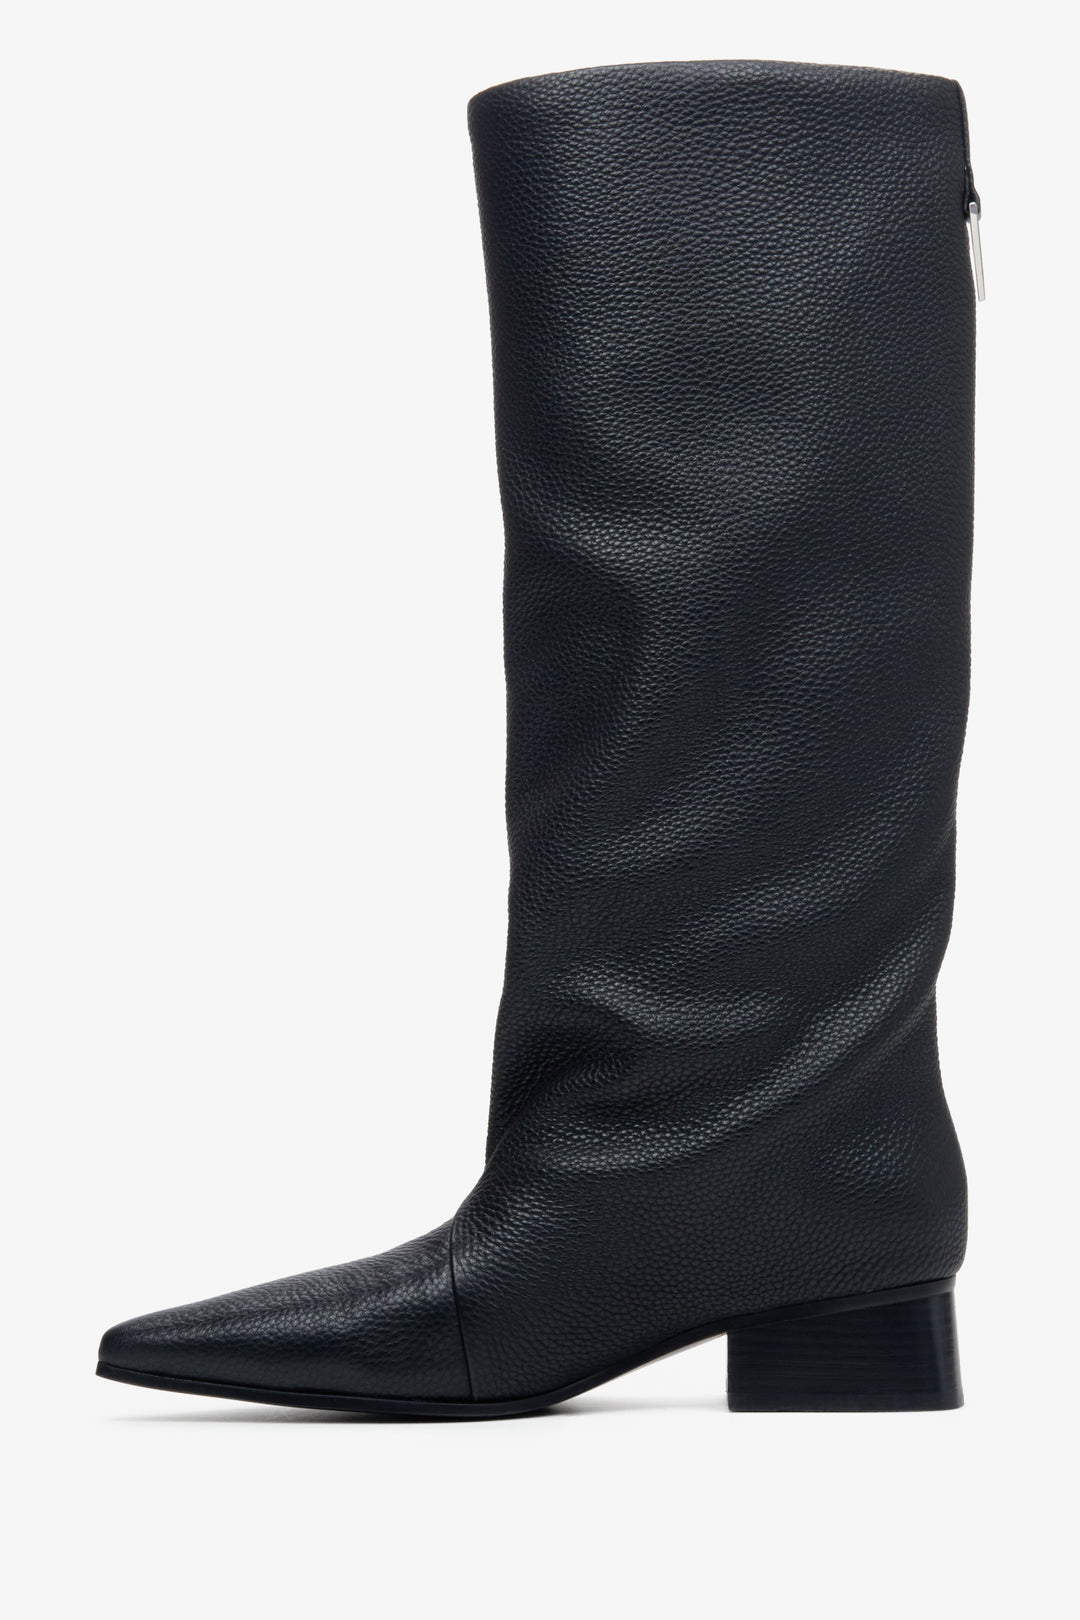 Black women's leather boots by Estro with a wide shaft - presentation of the shoe profile.